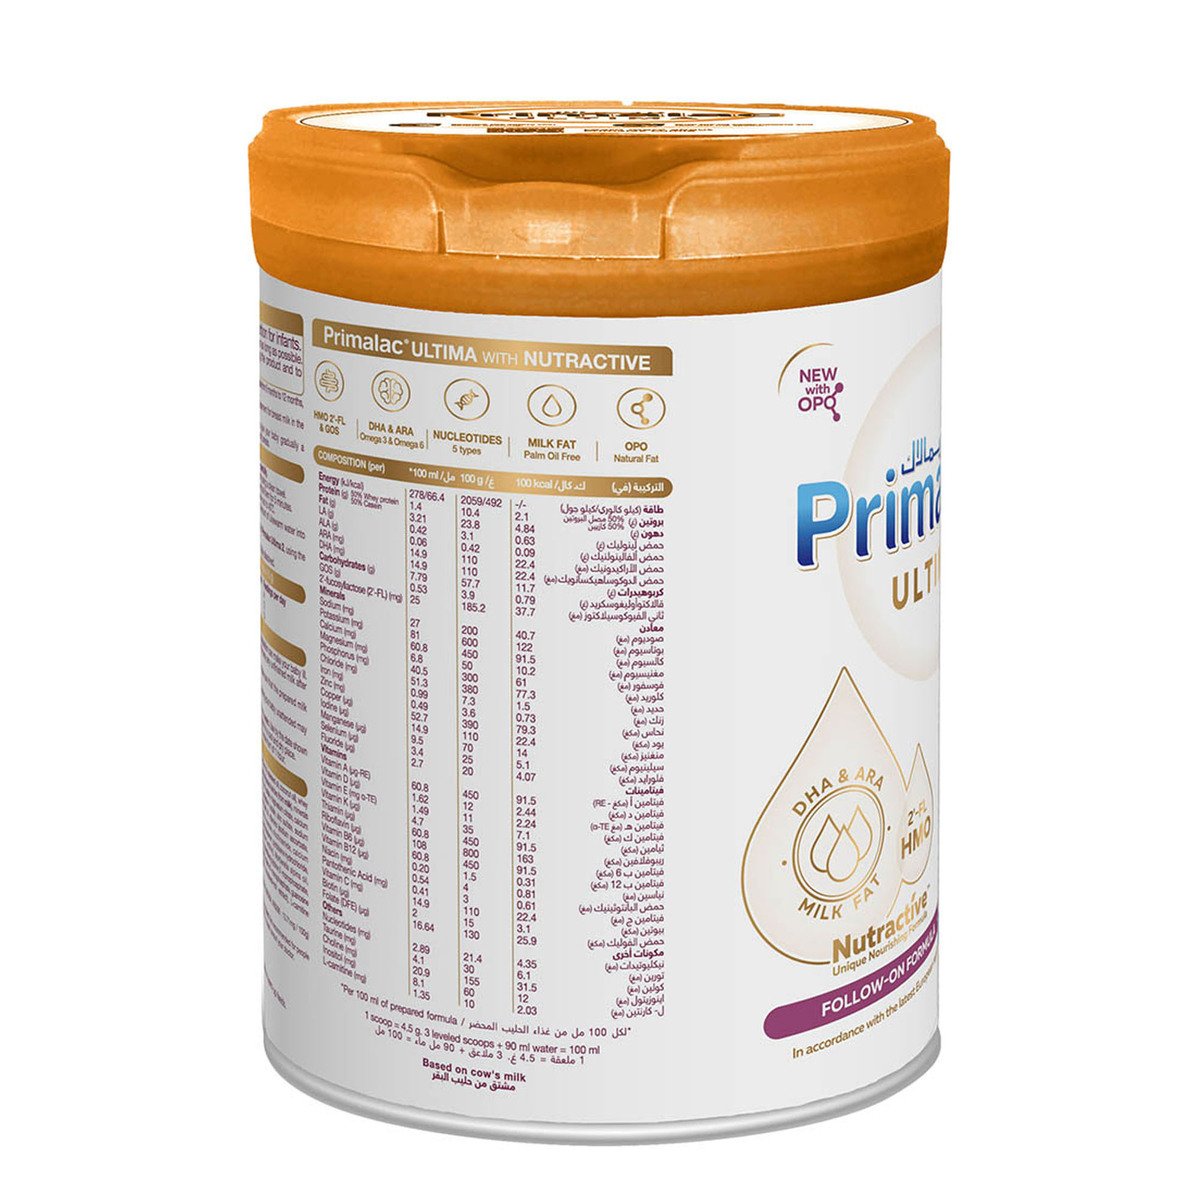 Primalac Ultima Stage 2 Follow On Formula From 6 to 12 Months 400g